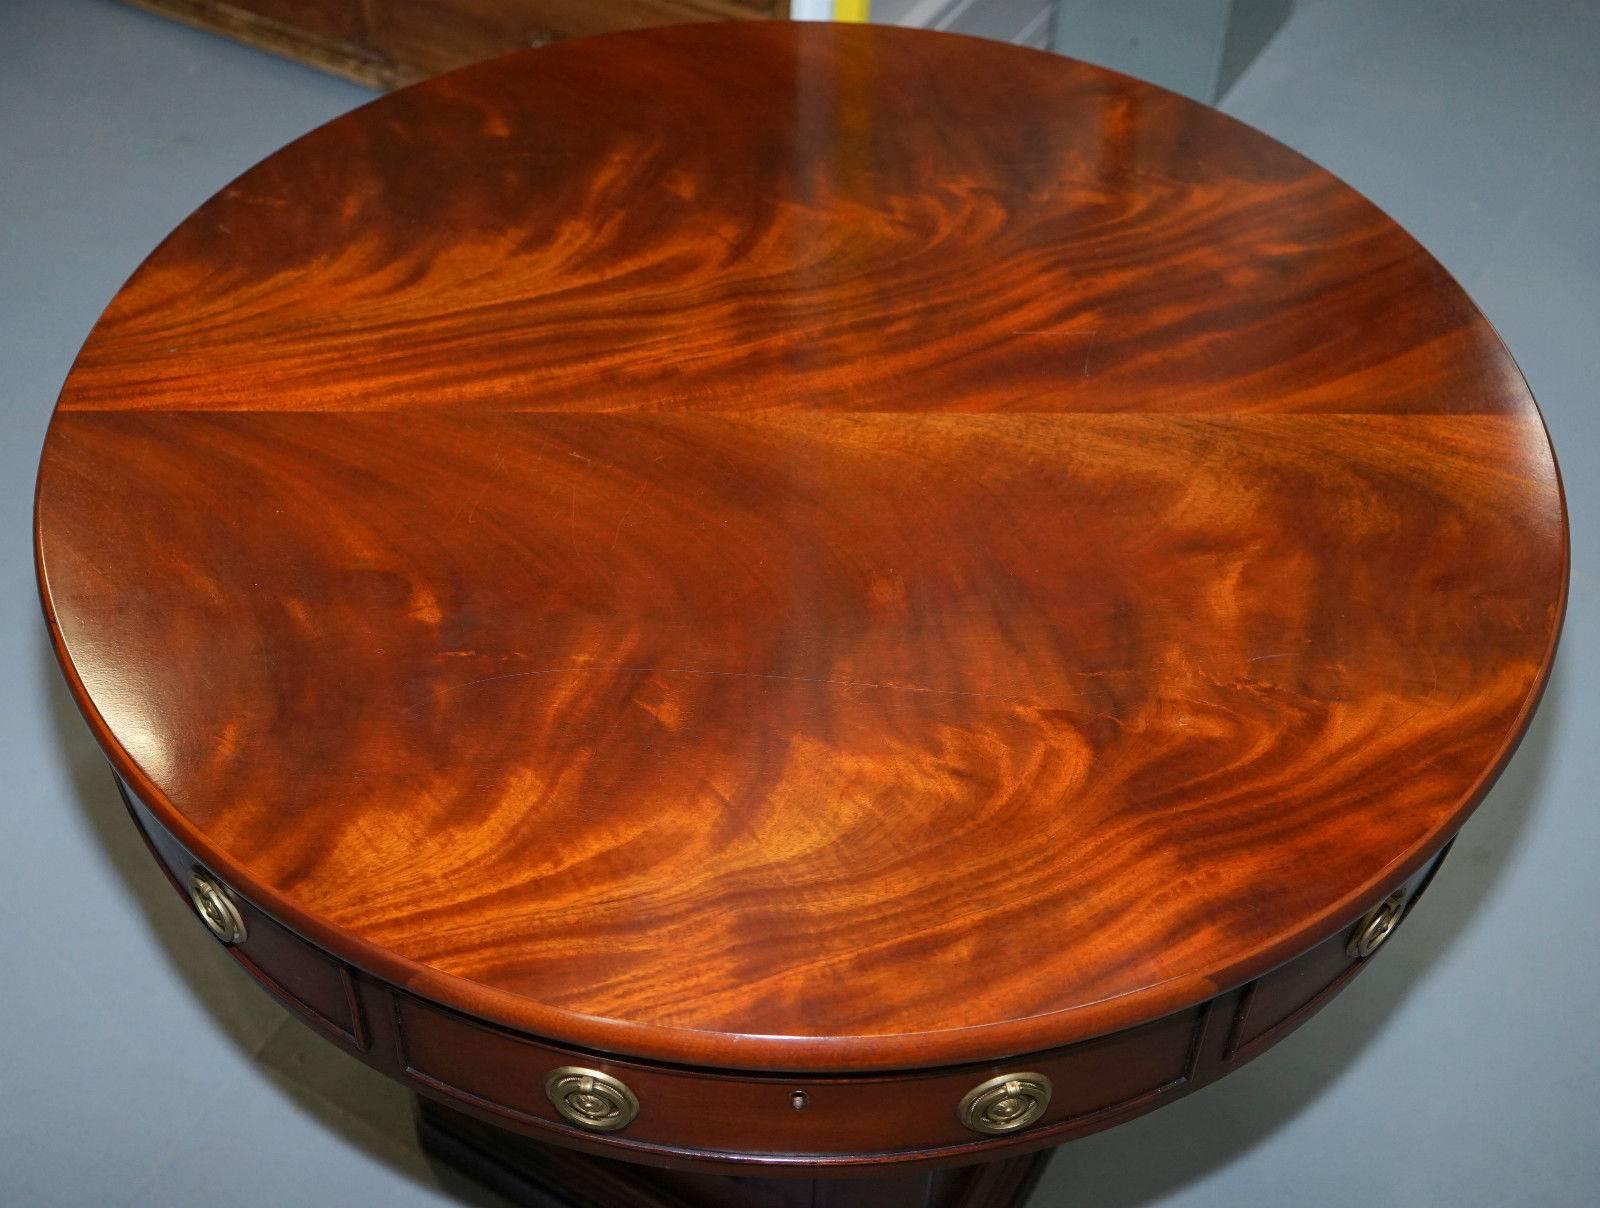 We are delighted to offer for sale this very rare original Ralph Lauren Regency style round Library table made from solid mahogany

This table which has now been discontinued, its just about as fine of an occasional table as you will ever find.